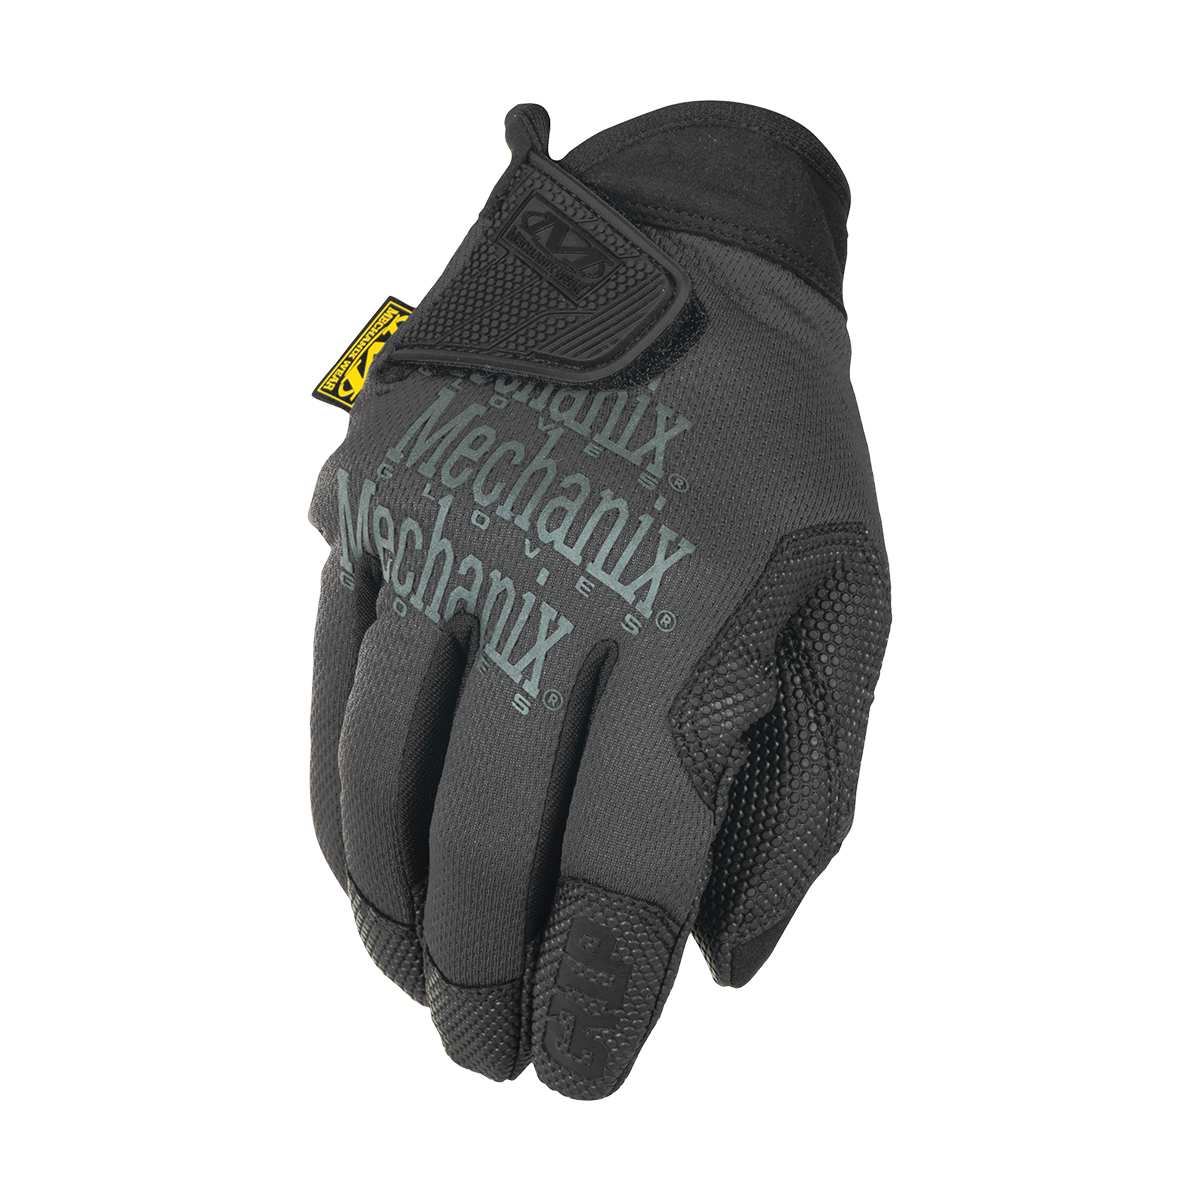 MECHANIX WEAR SPECIALTY GRIP – Forged Philippines